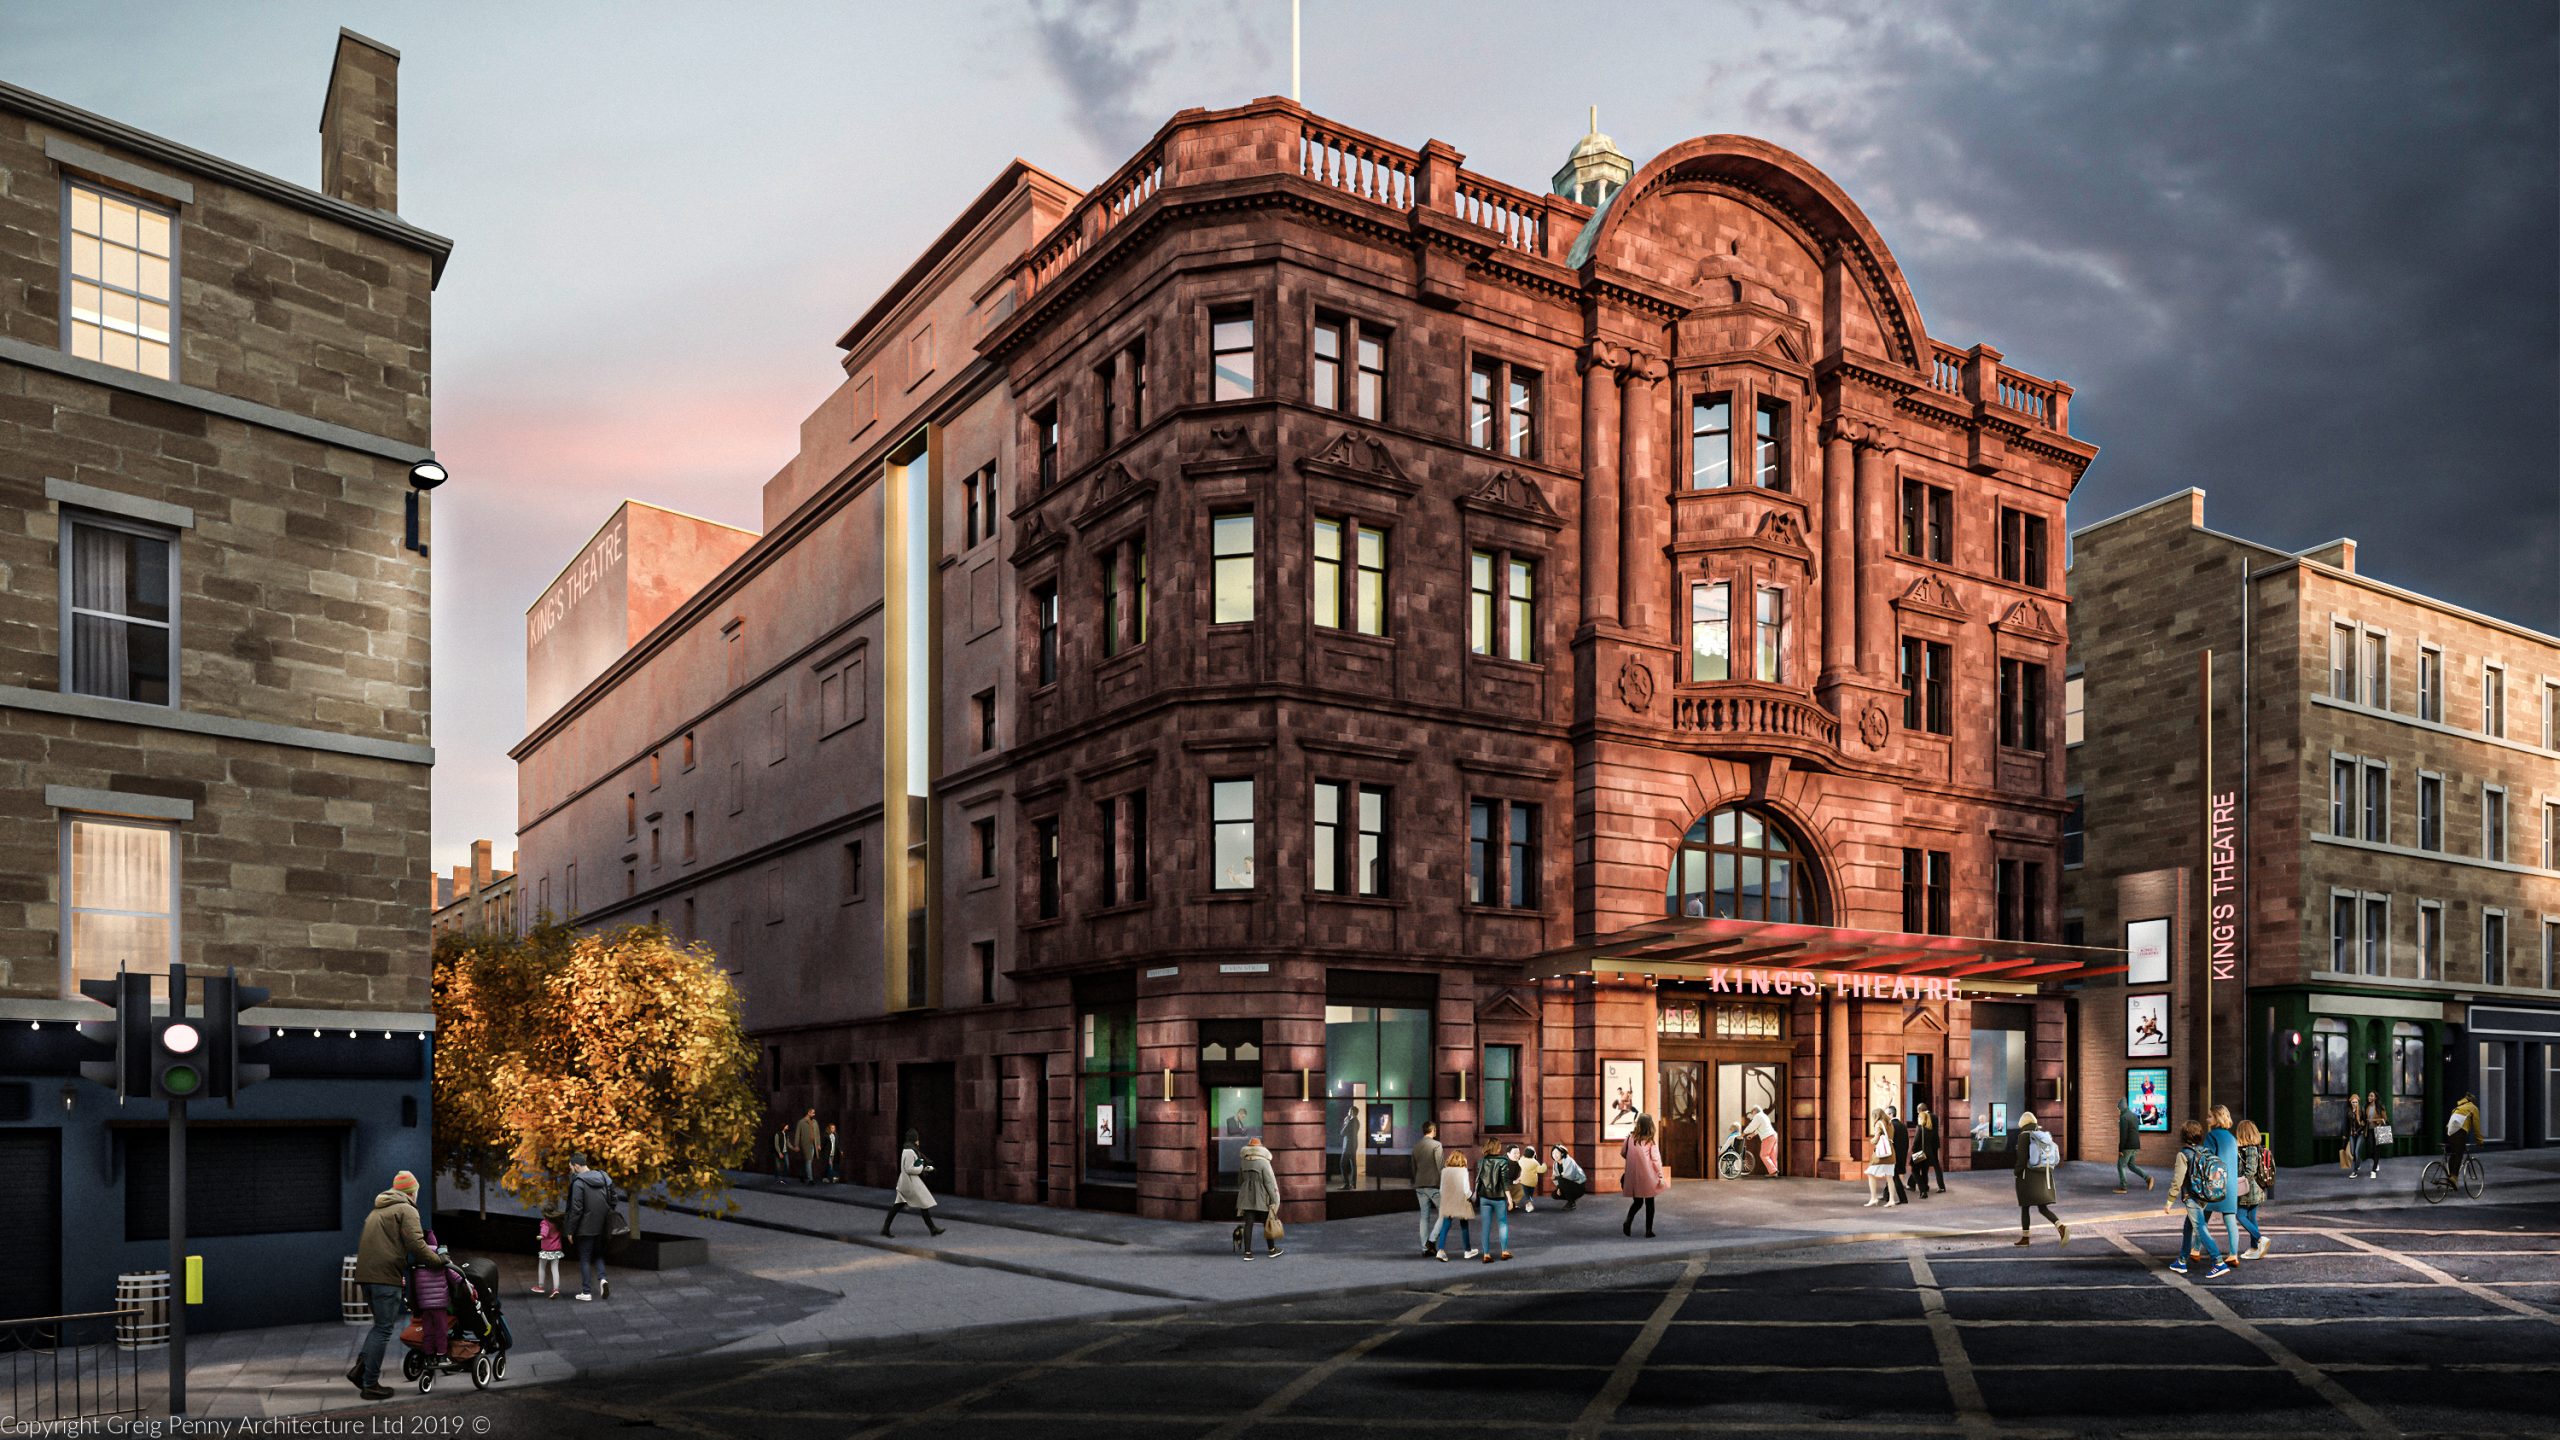 An artist's impression of the outside of the King's Theatre